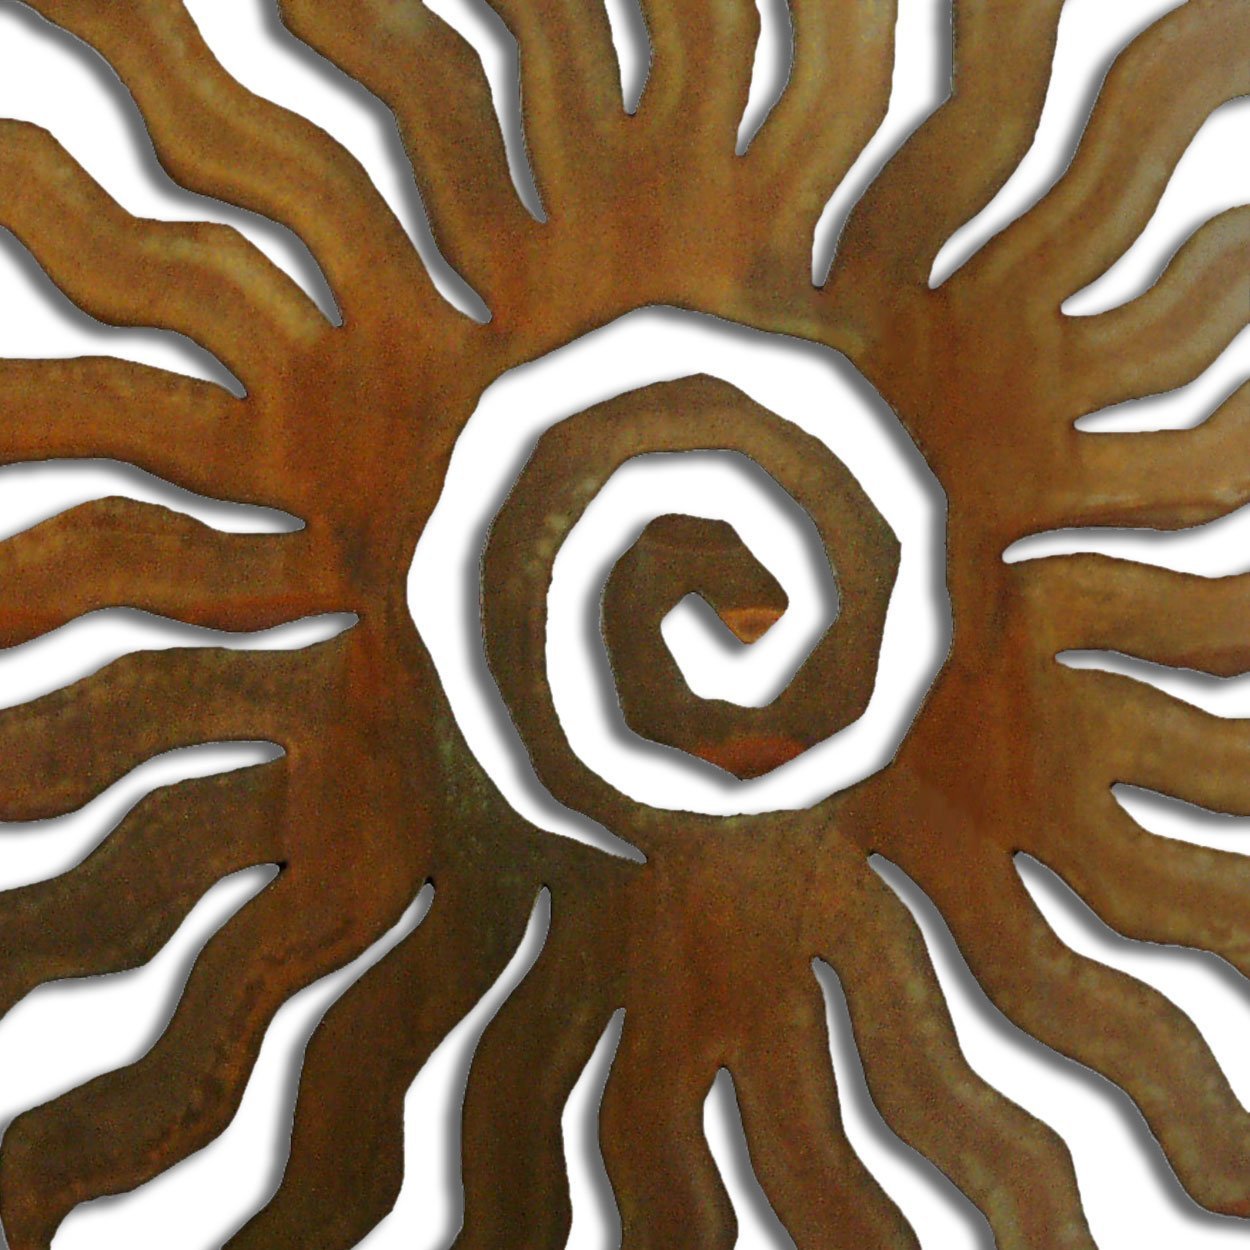 165163 - 24-inch large 24-Ray Sunburst 3D Metal Wall Art in a rich rust finish